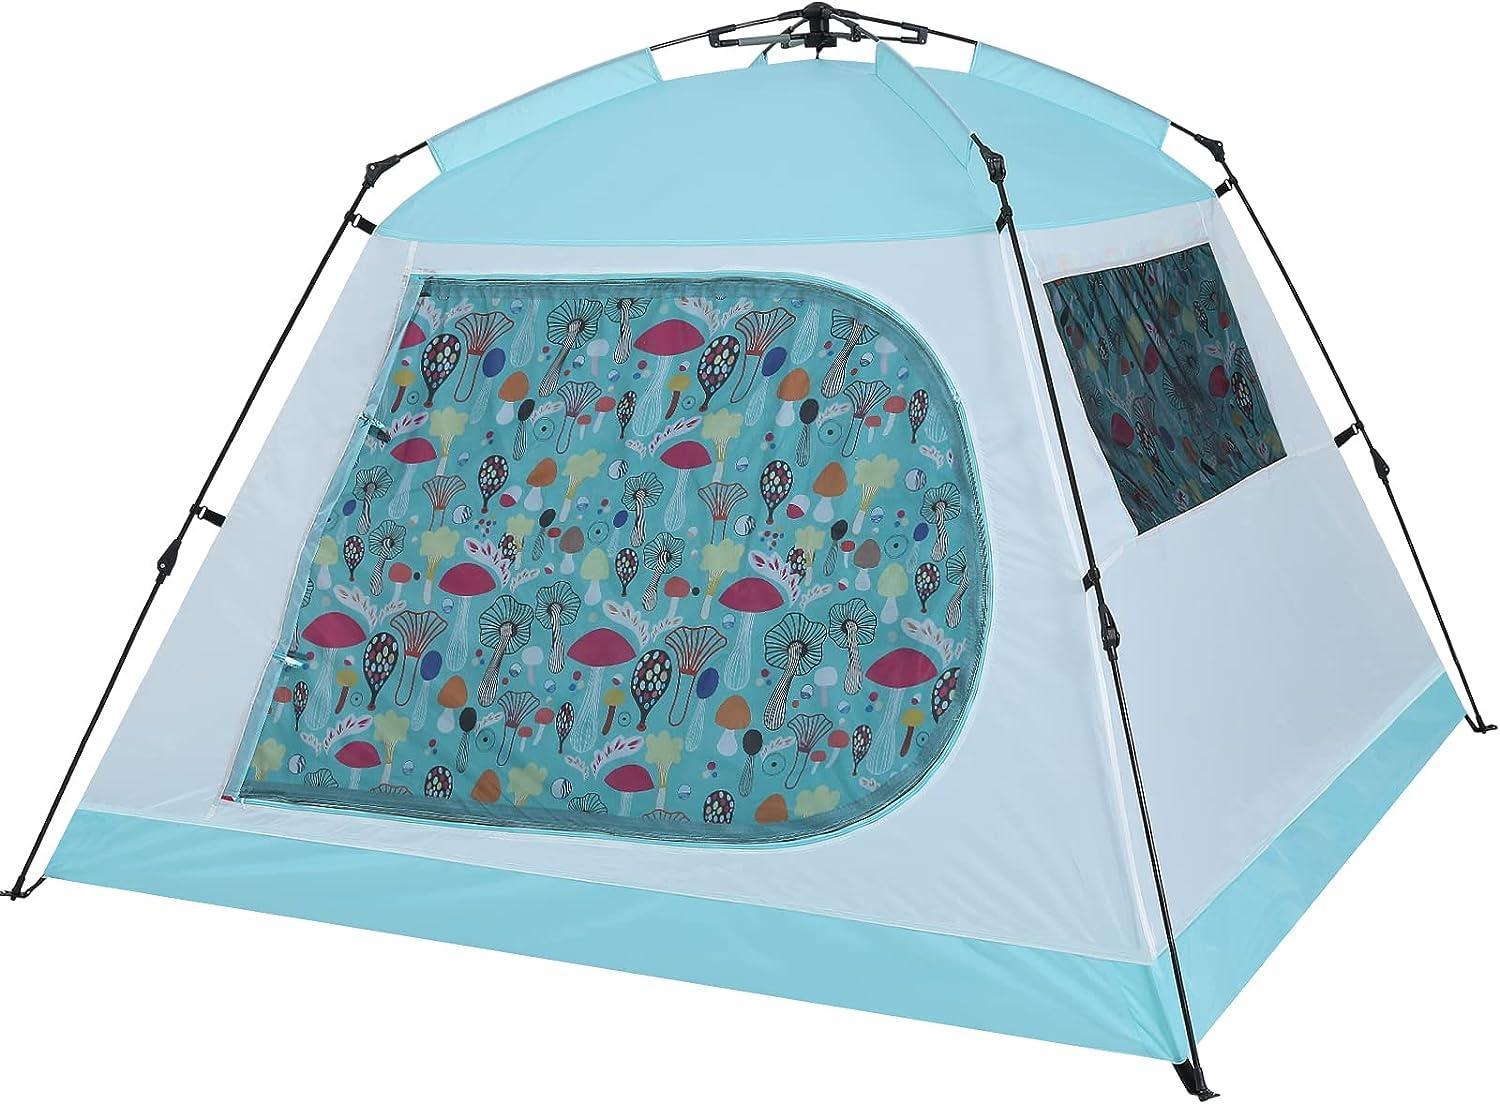 4 Person Camping Tent, Automatic One Touch Pop Up Camping Tent, Easy Setup (Sky Blue)